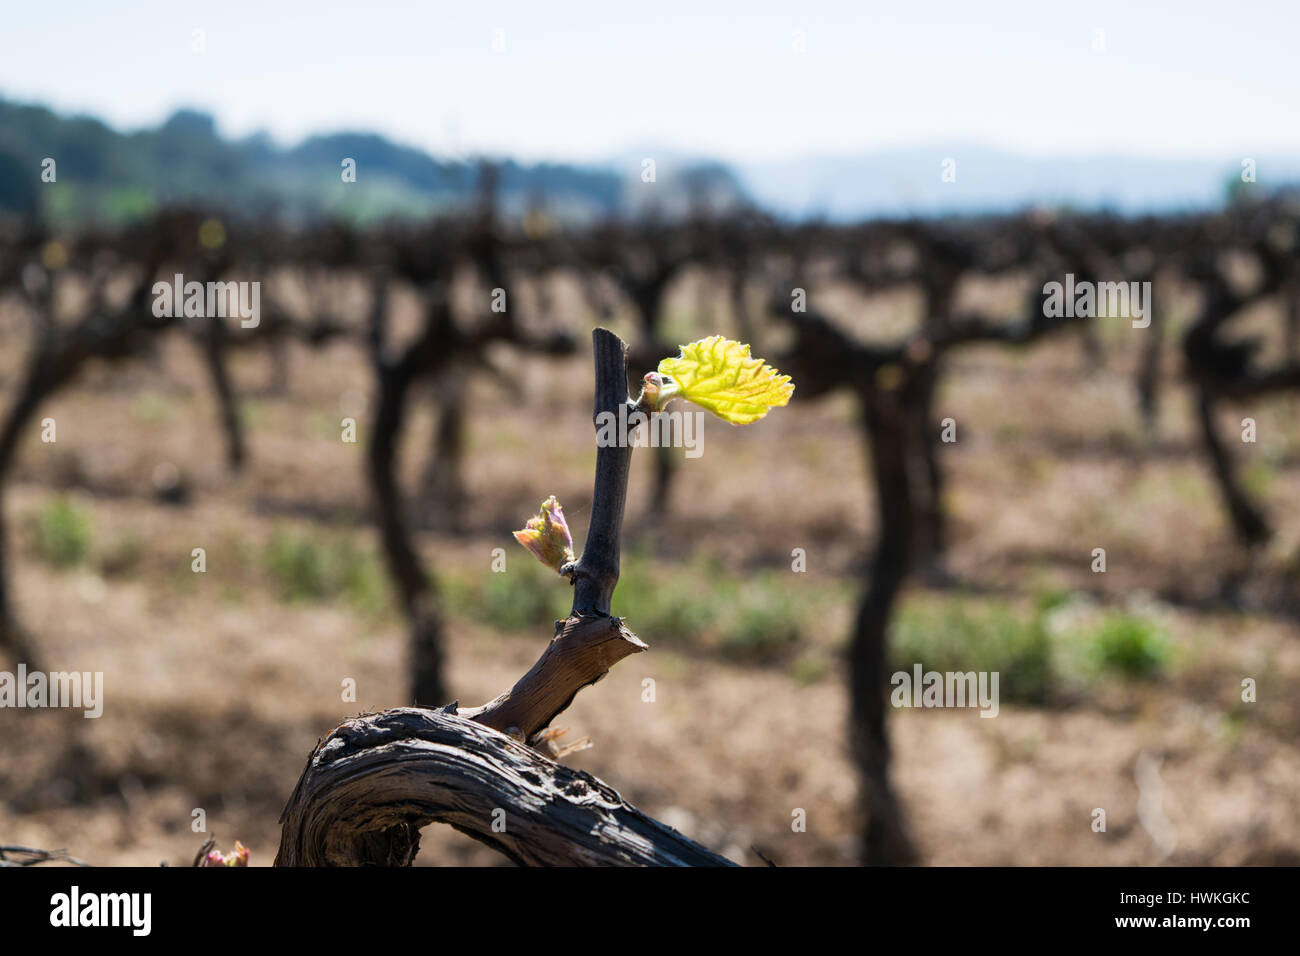 Early spring green shoot, new growth on mature grape vines, grape vine sprout Stock Photo